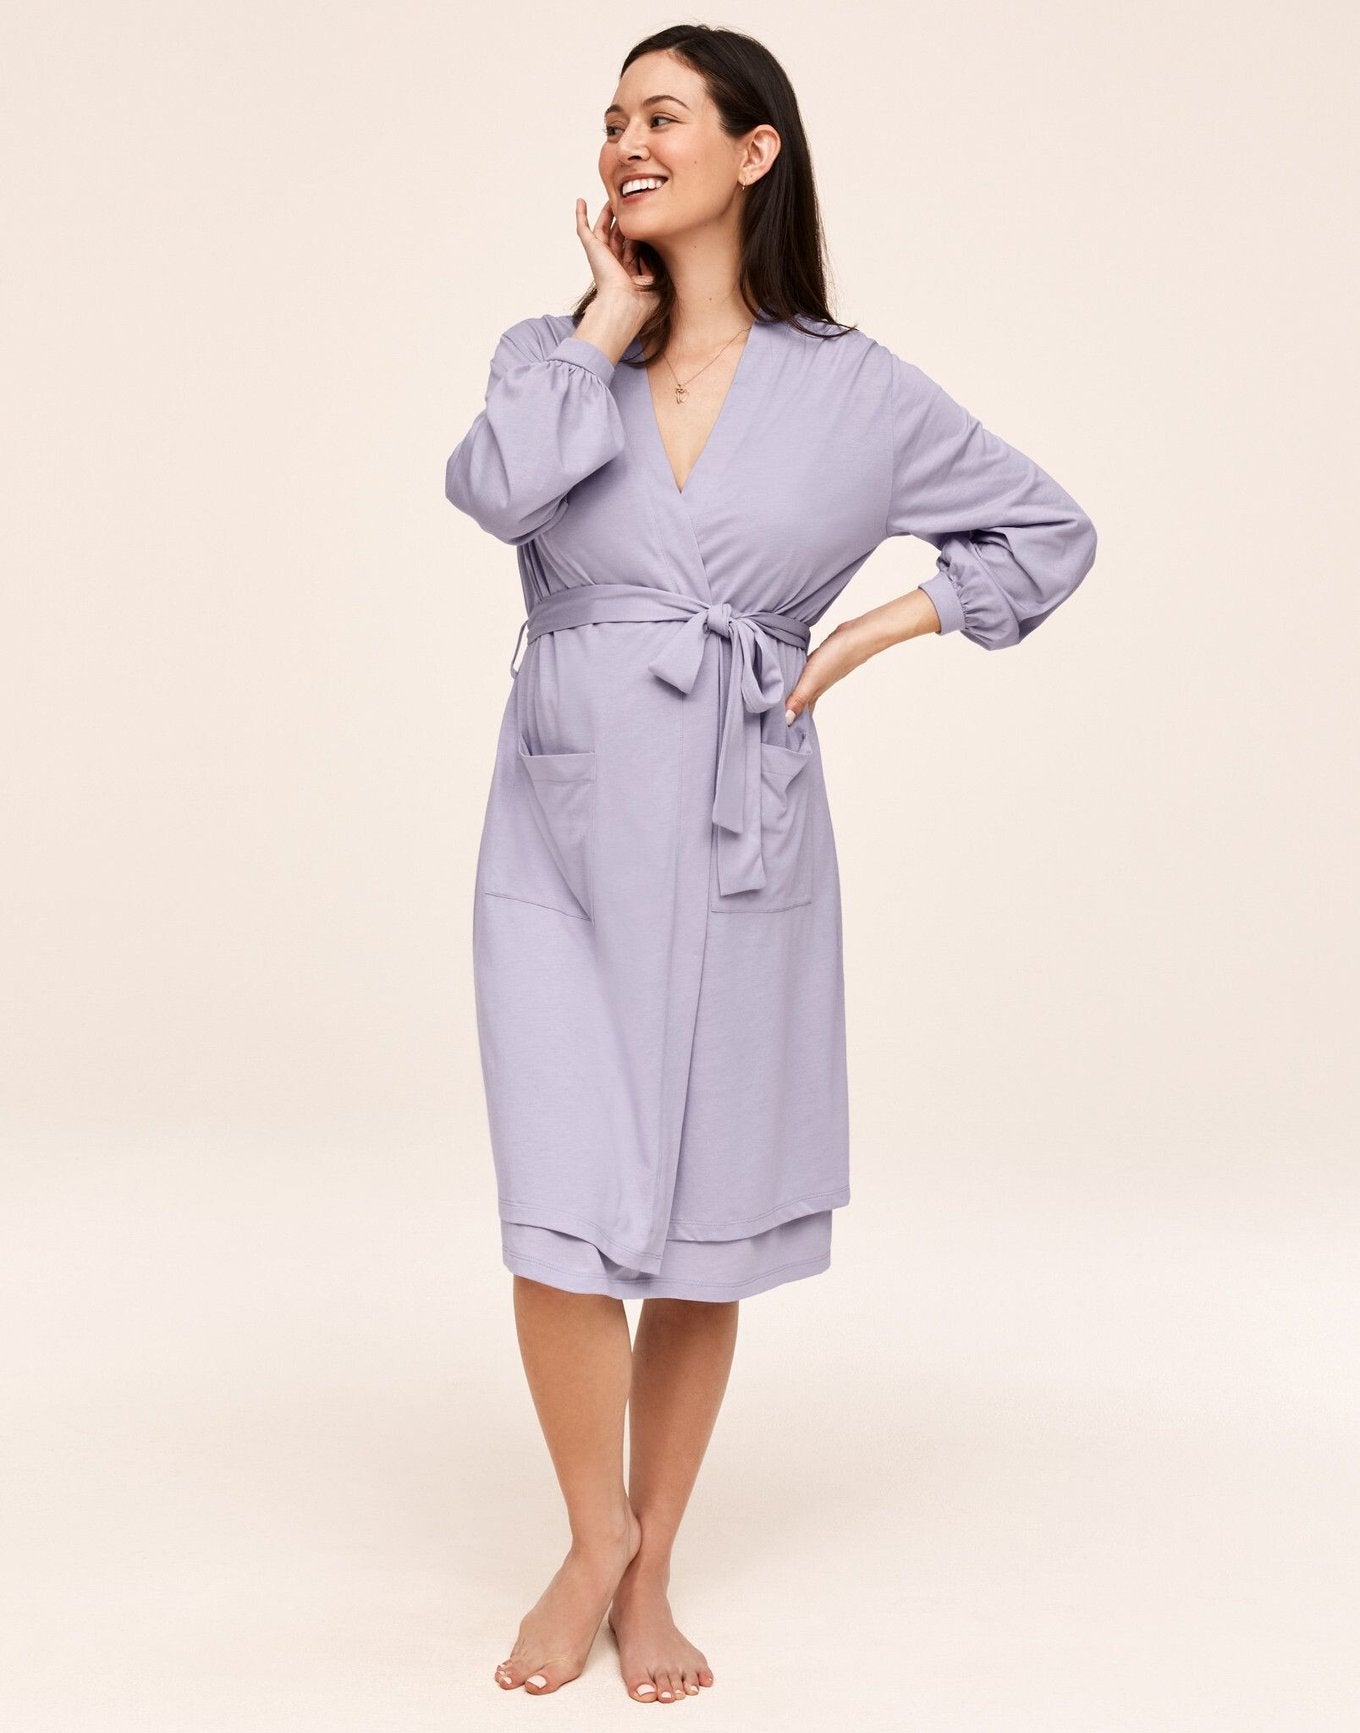 Belabumbum Elle Robe Luxe Pima Cotton in color Misty Lilac and shape robe